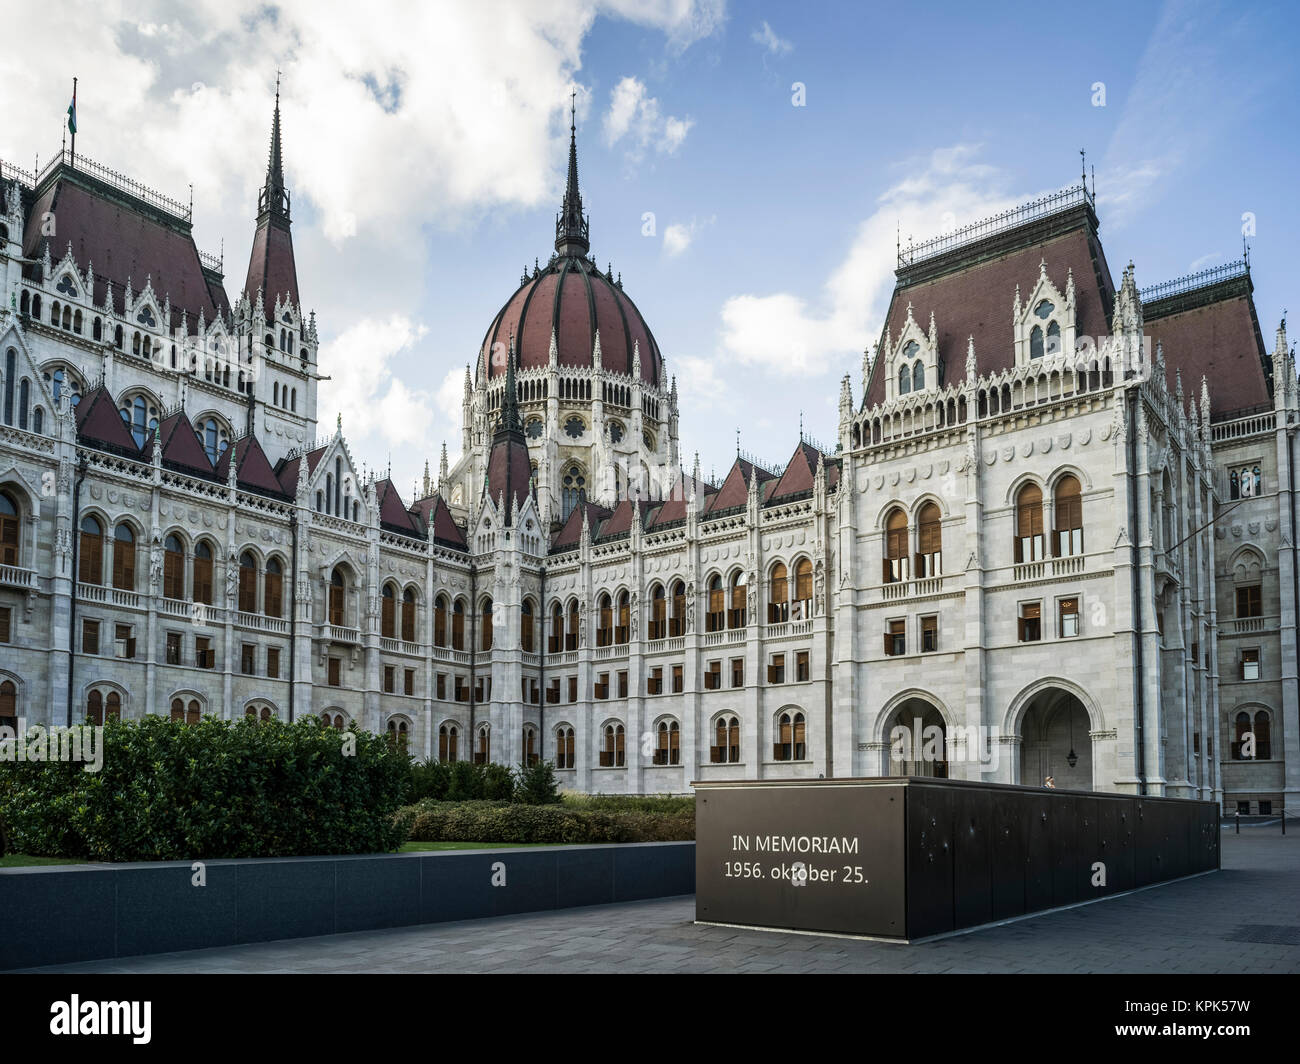 Hungarian Parliament Building and the below-ground In Memoriam for the events of 'Bloody Thursday', 25 October 1956; Budapest, Budapest, Hungary Stock Photo